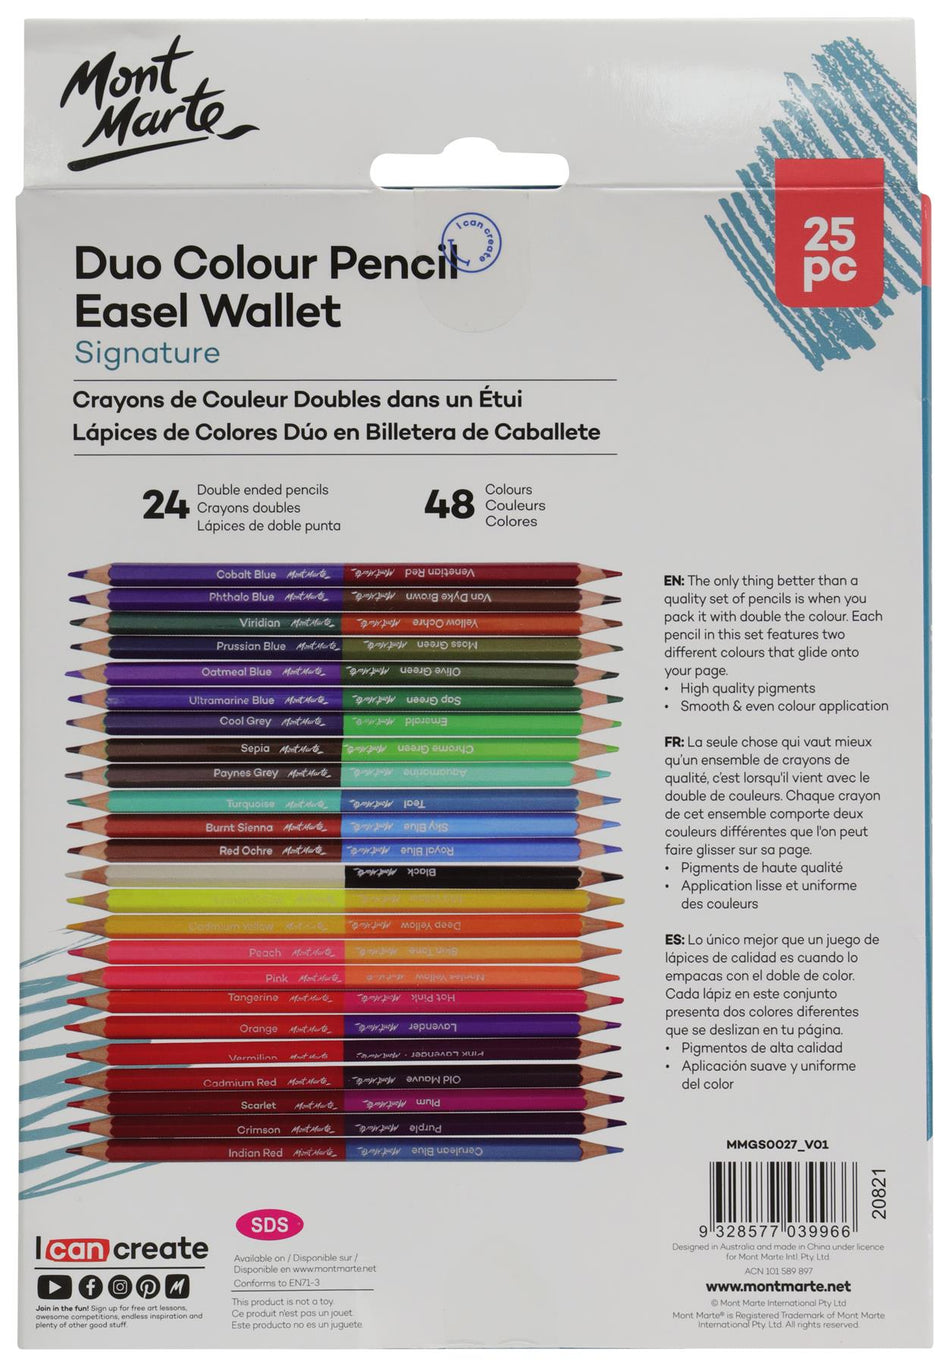 MMGS0027 Duo Colour Pencil Easel Wallet - Set of 25